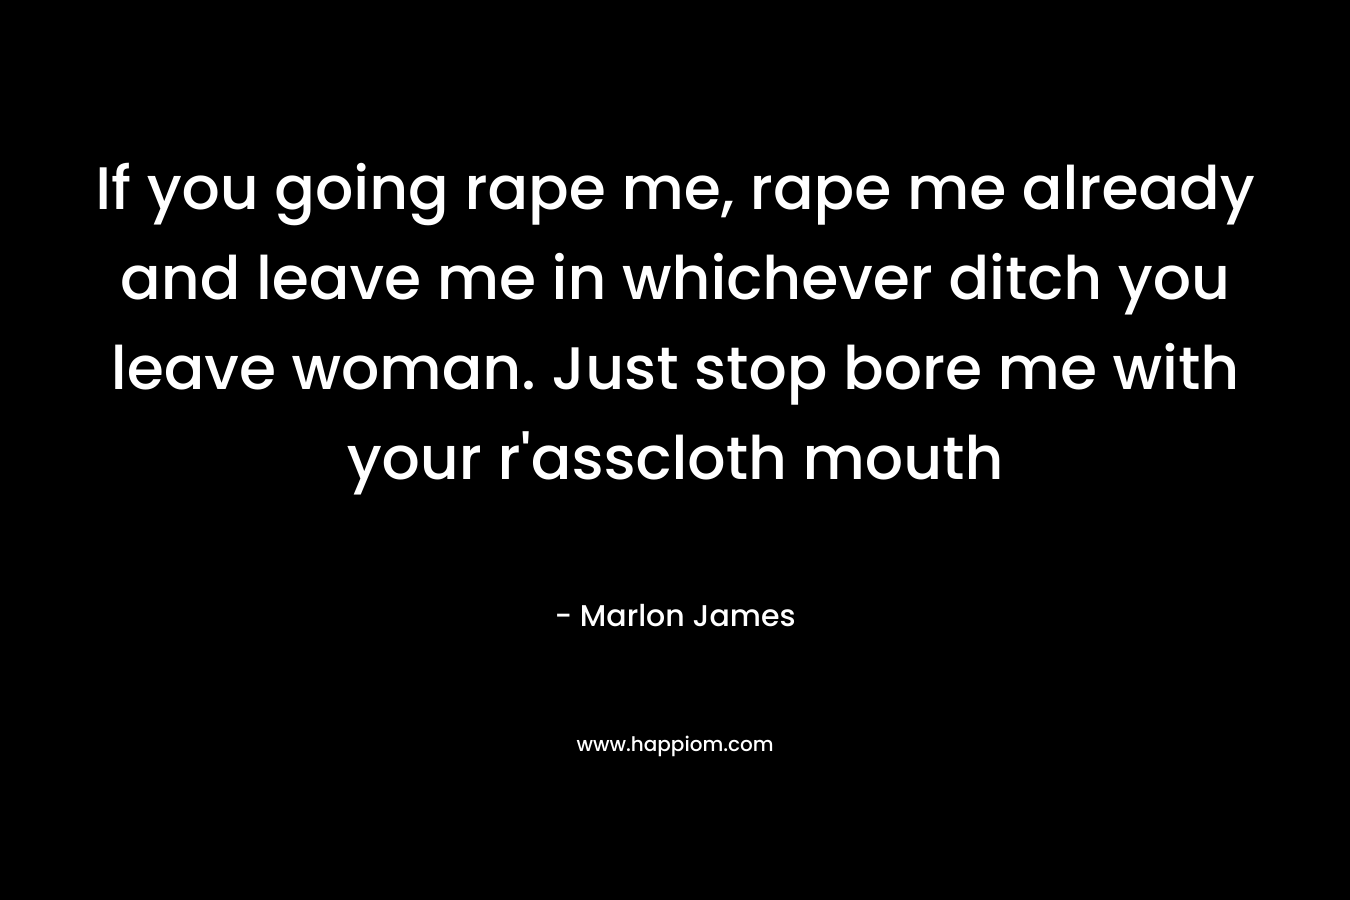 If you going rape me, rape me already and leave me in whichever ditch you leave woman. Just stop bore me with your r'asscloth mouth